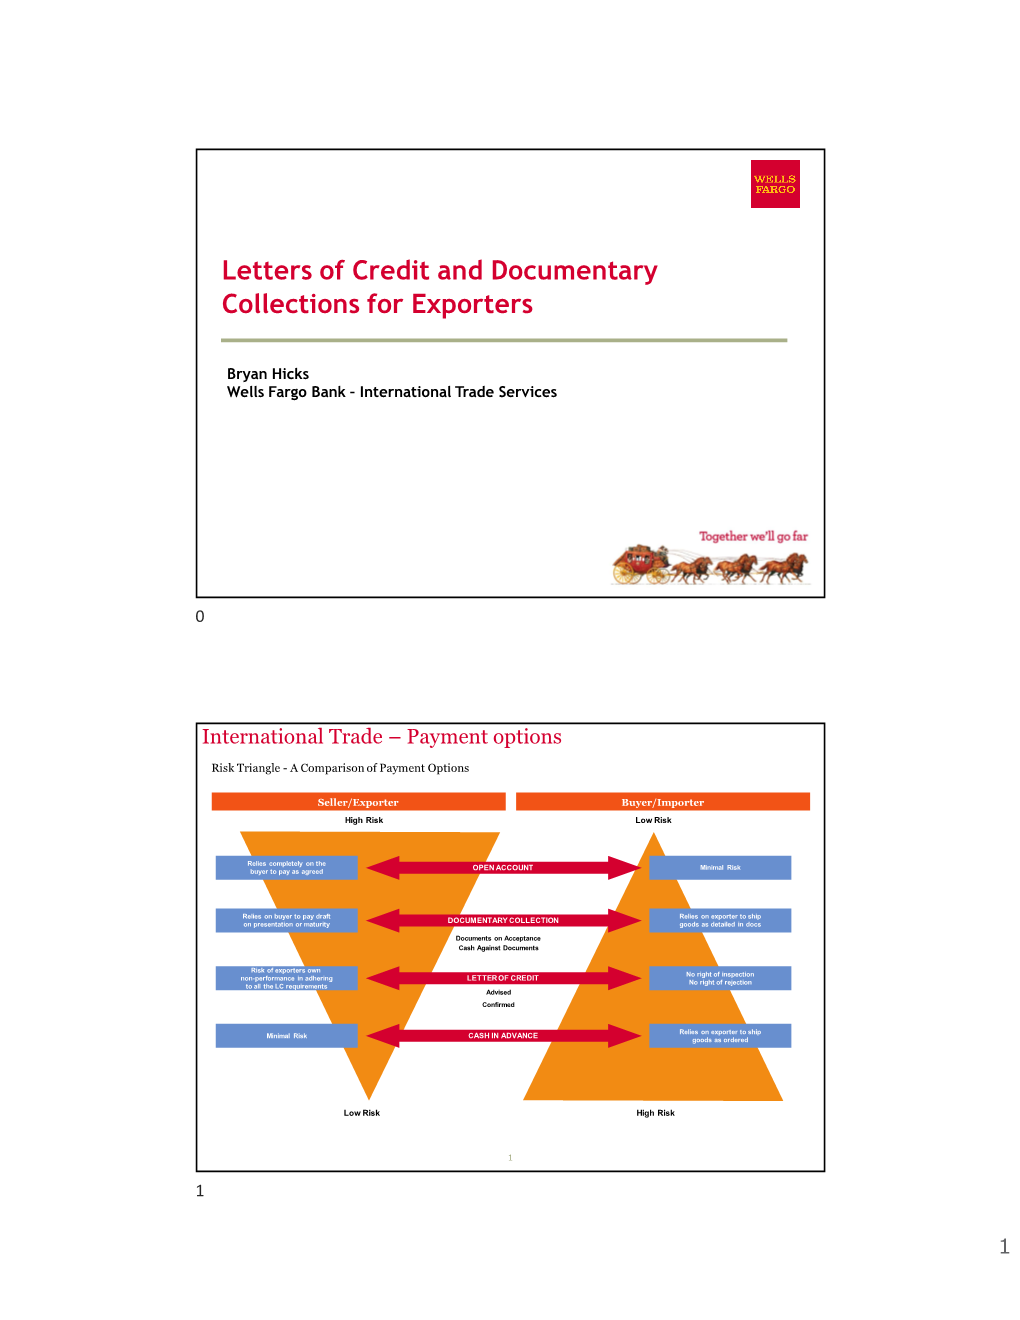 Letters of Credit and Documentary Collections for Exporters